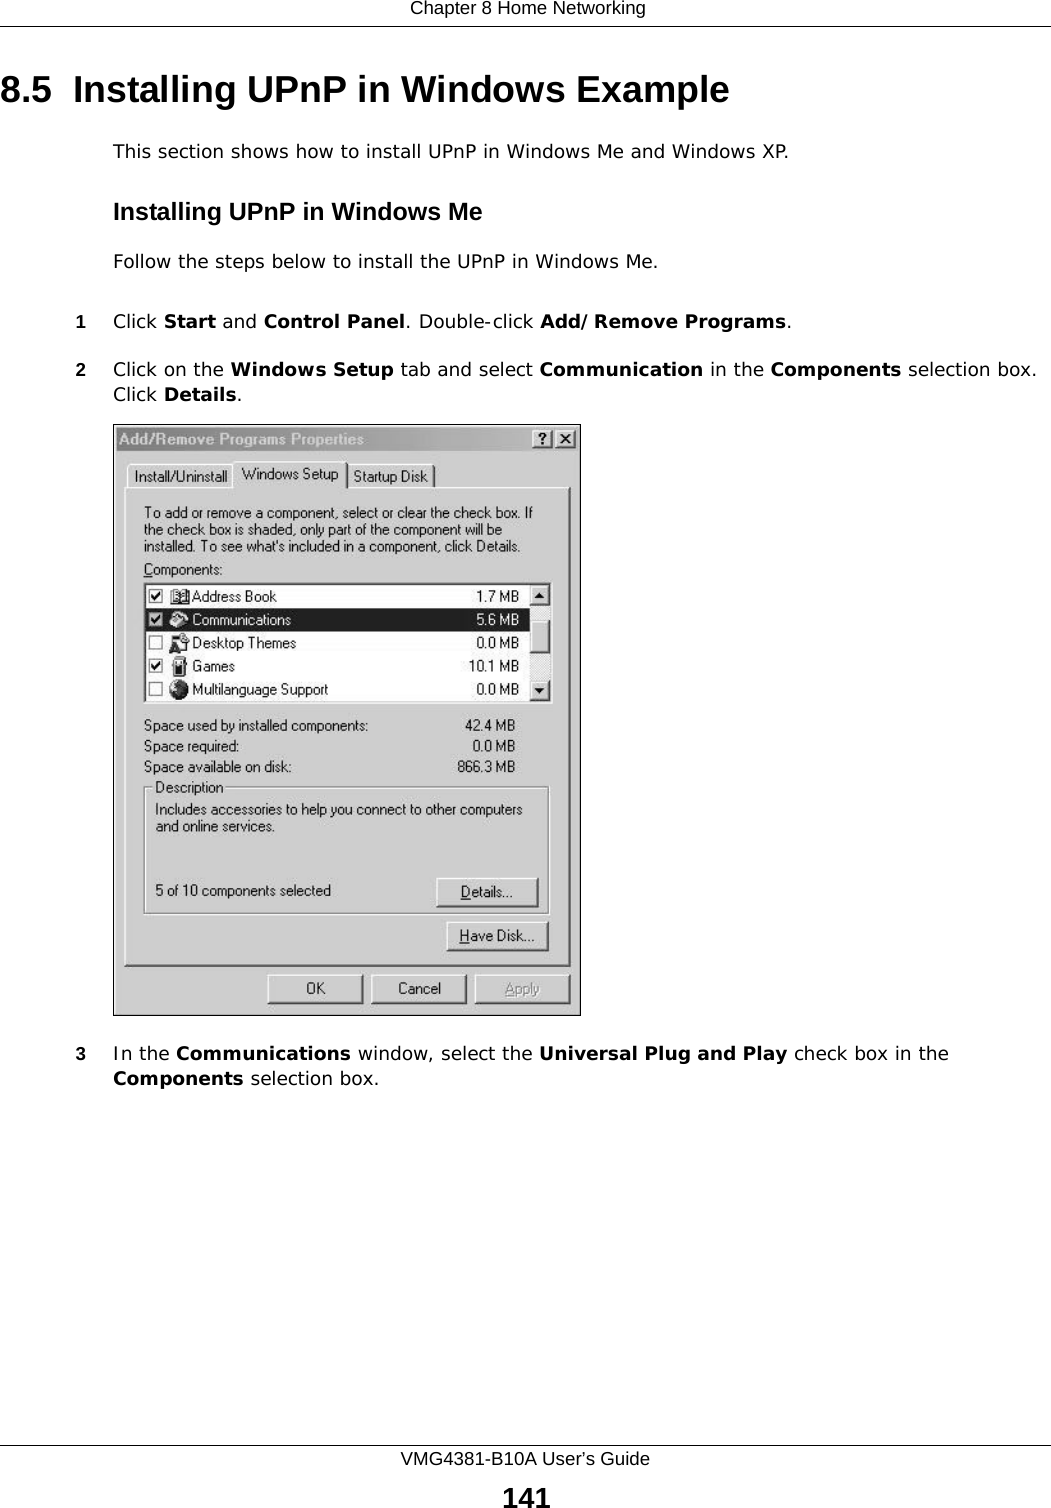  Chapter 8 Home NetworkingVMG4381-B10A User’s Guide1418.5  Installing UPnP in Windows ExampleThis section shows how to install UPnP in Windows Me and Windows XP. Installing UPnP in Windows MeFollow the steps below to install the UPnP in Windows Me. 1Click Start and Control Panel. Double-click Add/Remove Programs.2Click on the Windows Setup tab and select Communication in the Components selection box. Click Details. Add/Remove Programs: Windows Setup: Communication 3In the Communications window, select the Universal Plug and Play check box in the Components selection box. 